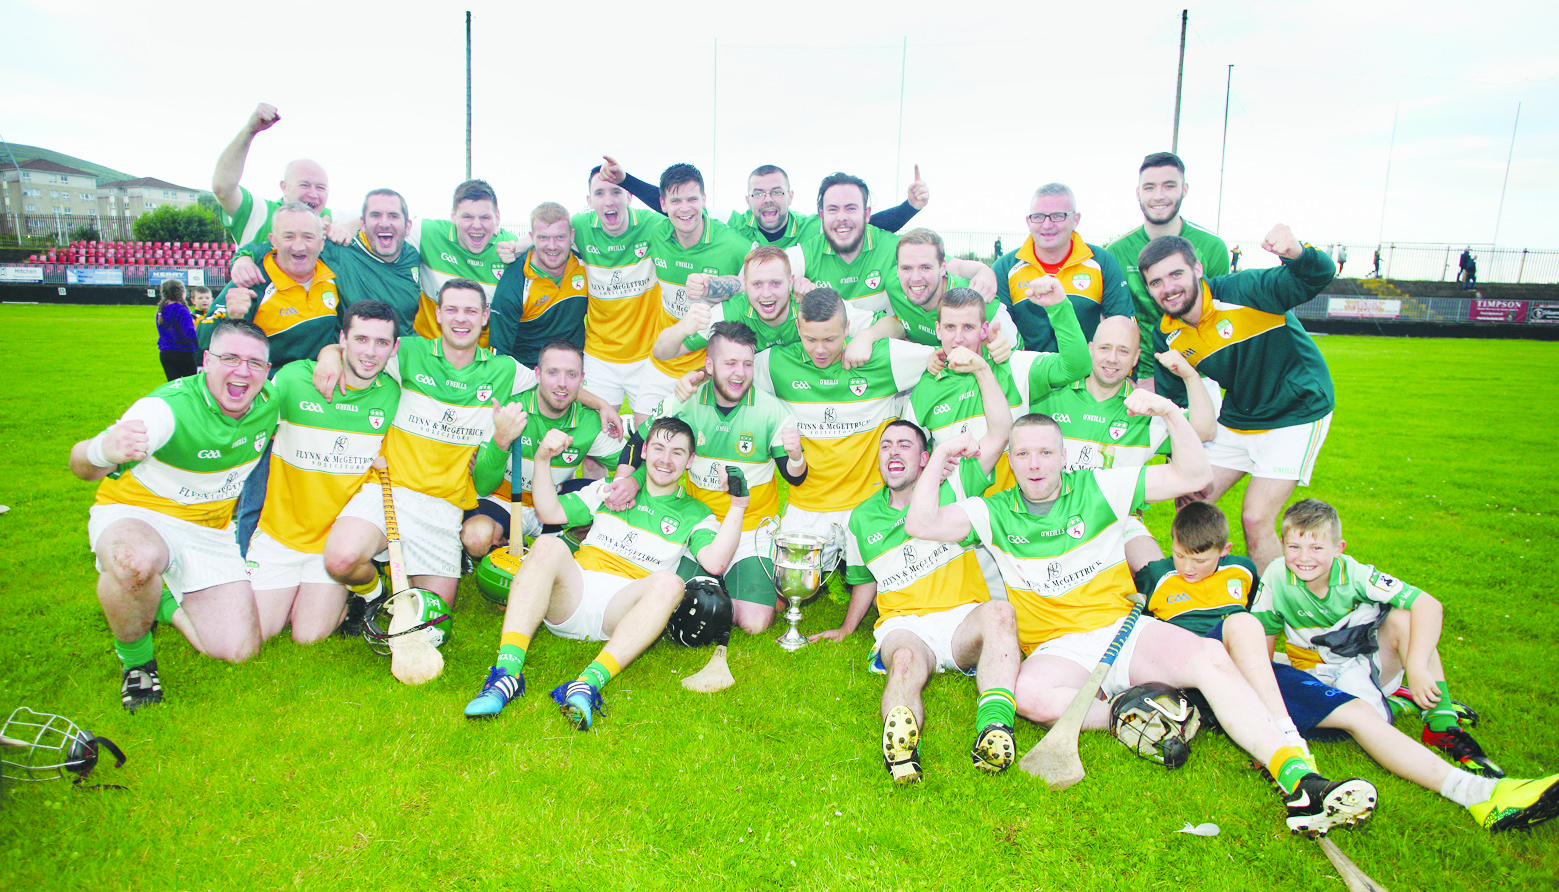 Michael Davitt’s celebrate after retaining the Antrim Junior B Hurling Championship with a narrow one-point win over St Agnes’ at Sarsfield’s on Saturday night